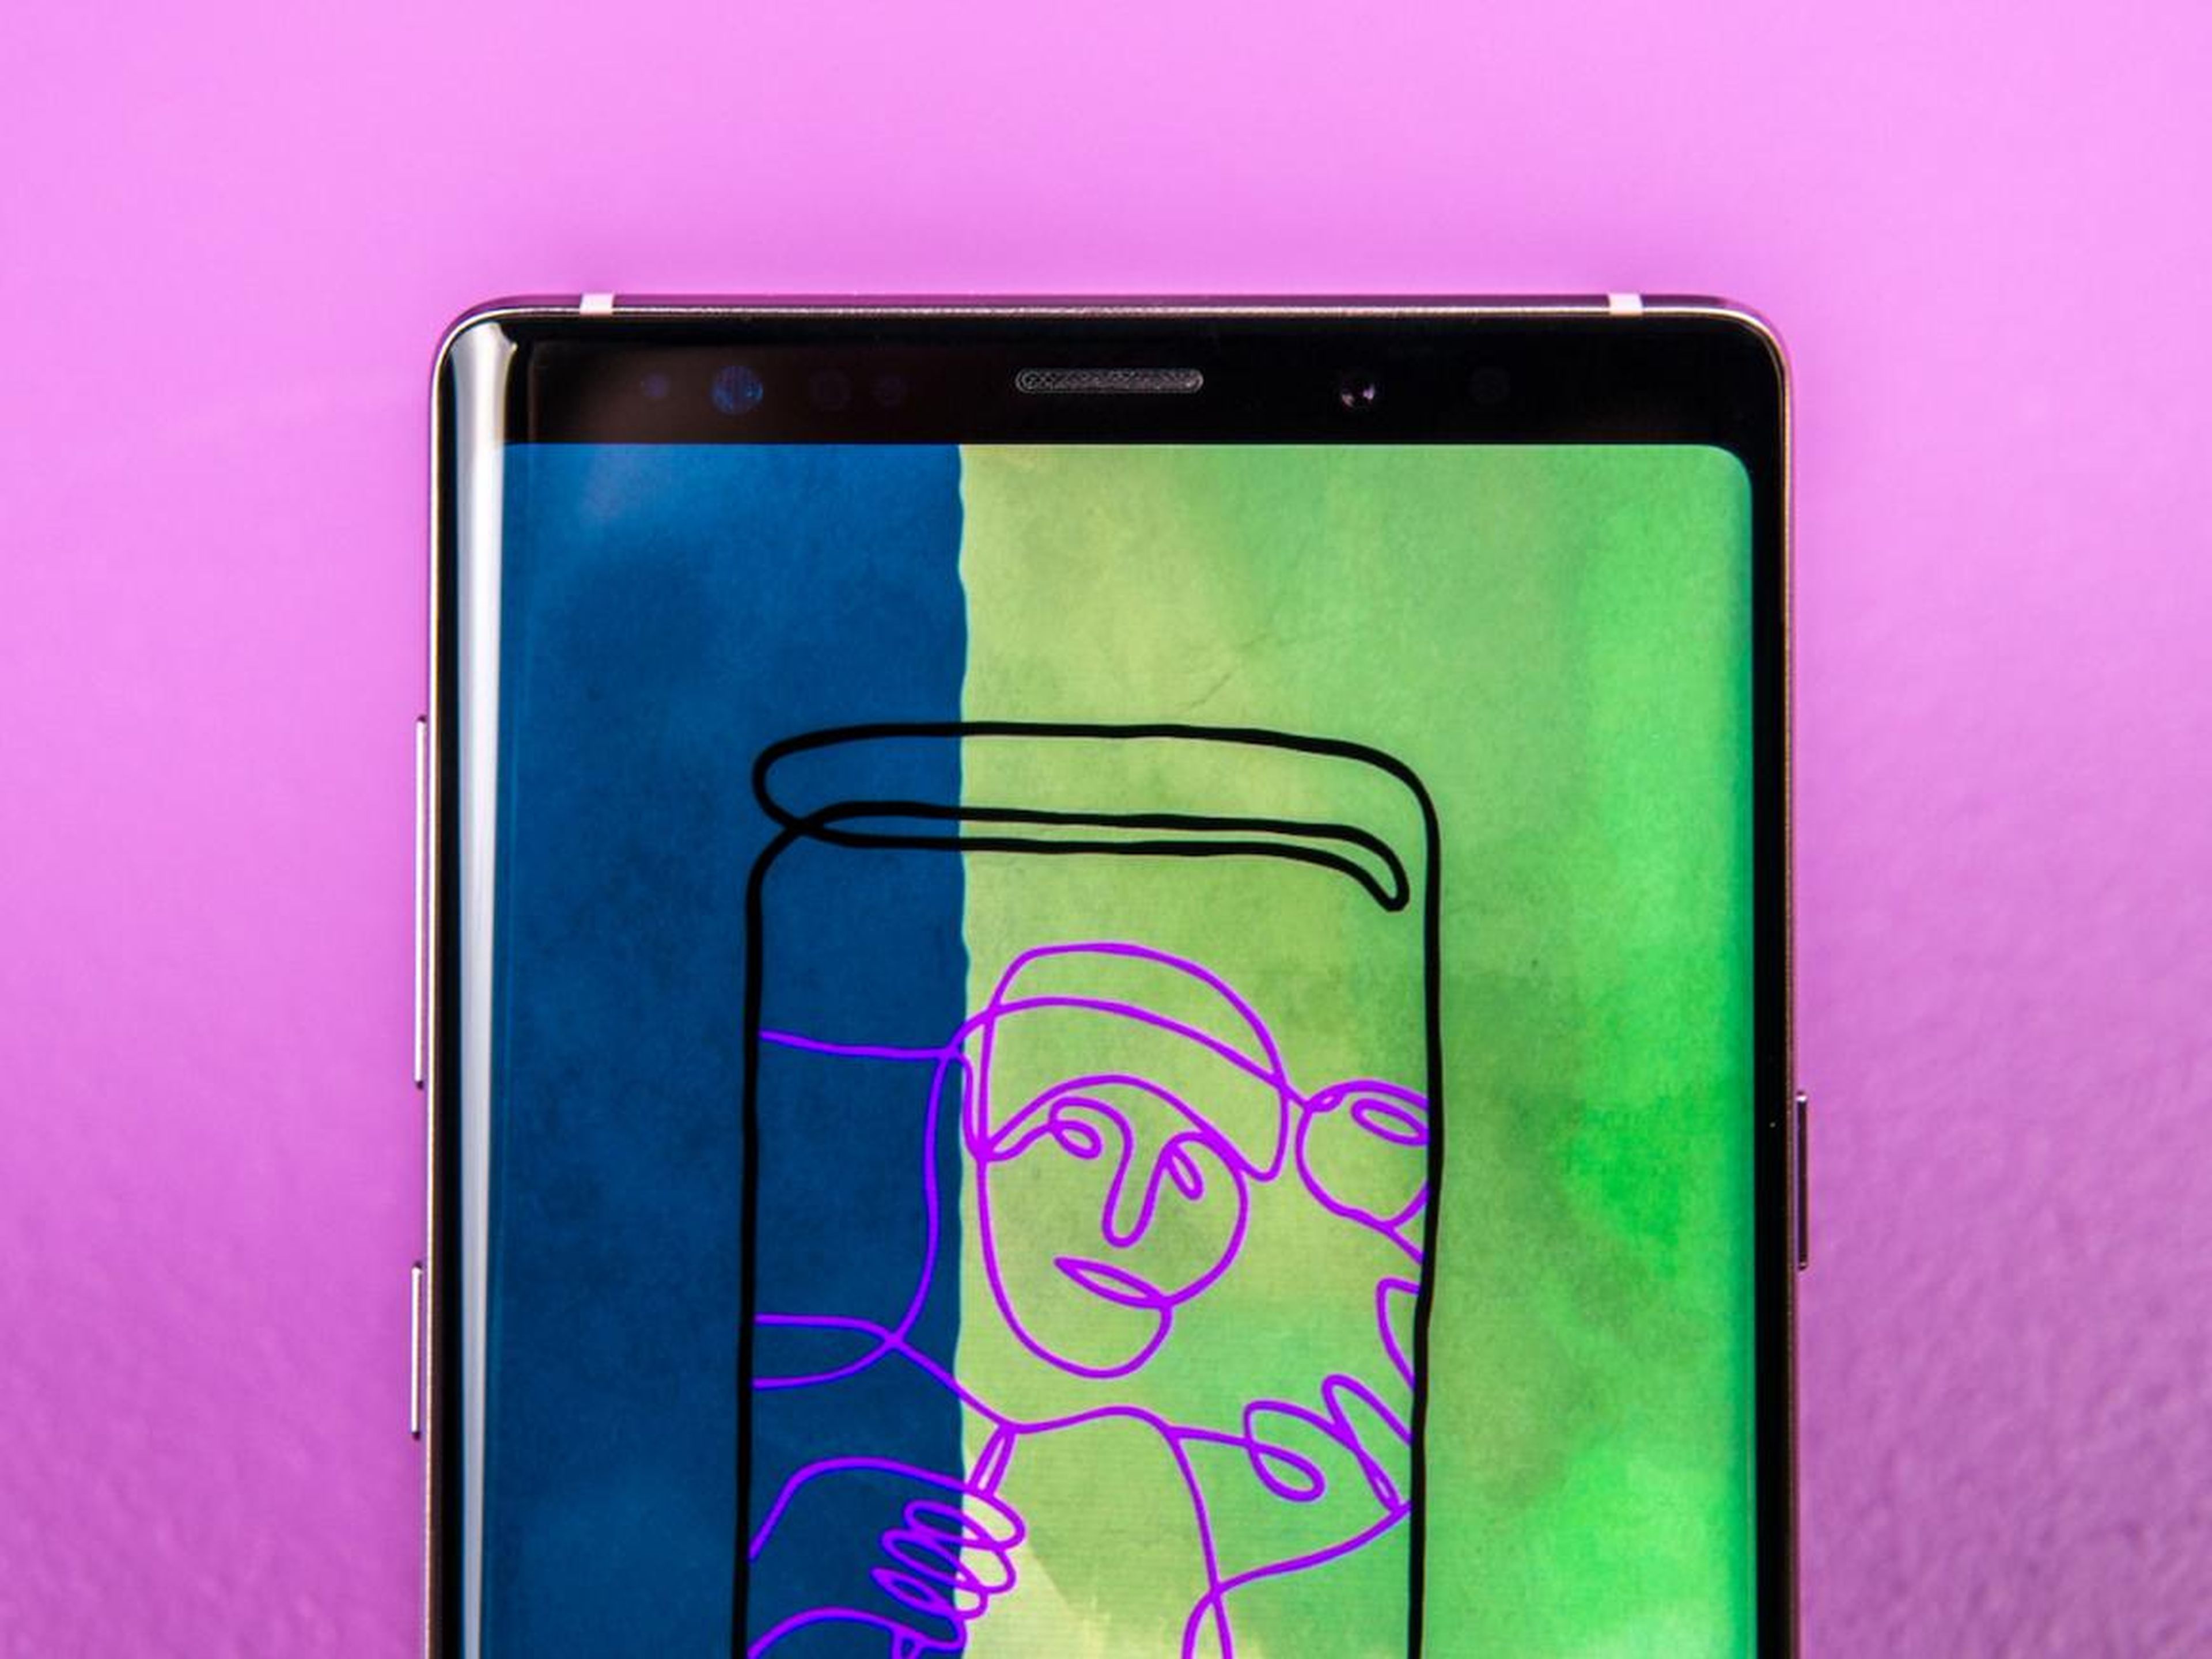 Overall, you're getting more with the Galaxy Note 9 than the iPhone X for the $1,000 price tag.